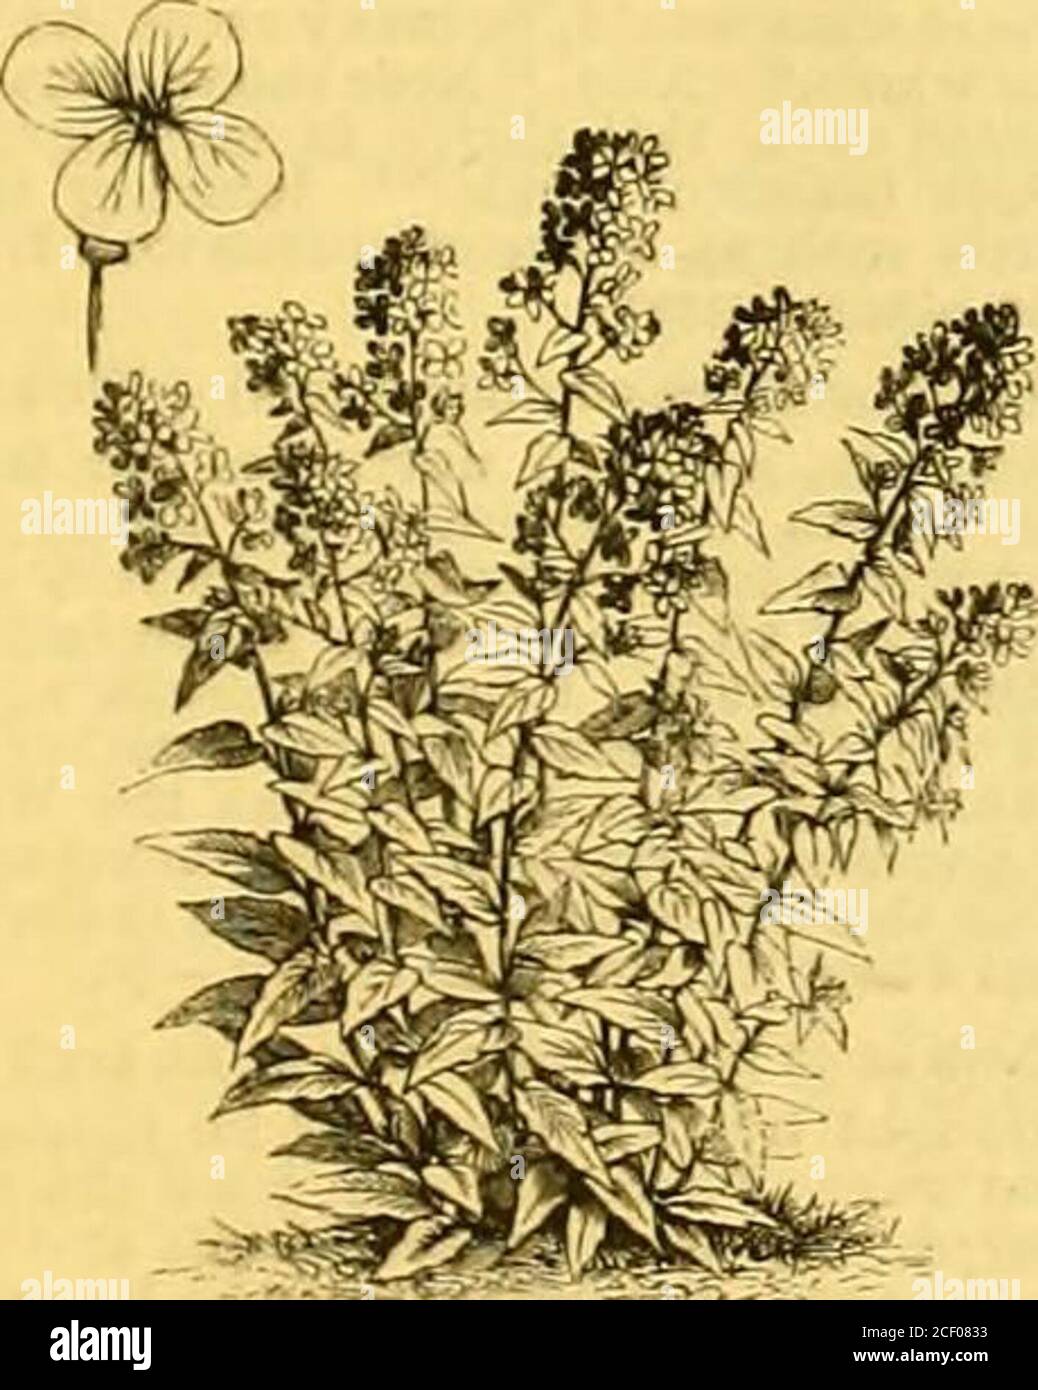 . The Garden : an illustrated weekly journal of gardening in all its branches. Illyriau Pancratium (Pancratium illyricum) Martagon Lily and flower spike (L. Martagon). Umbel-flowered Lily (Lilium umbellatum).. Stock Photo